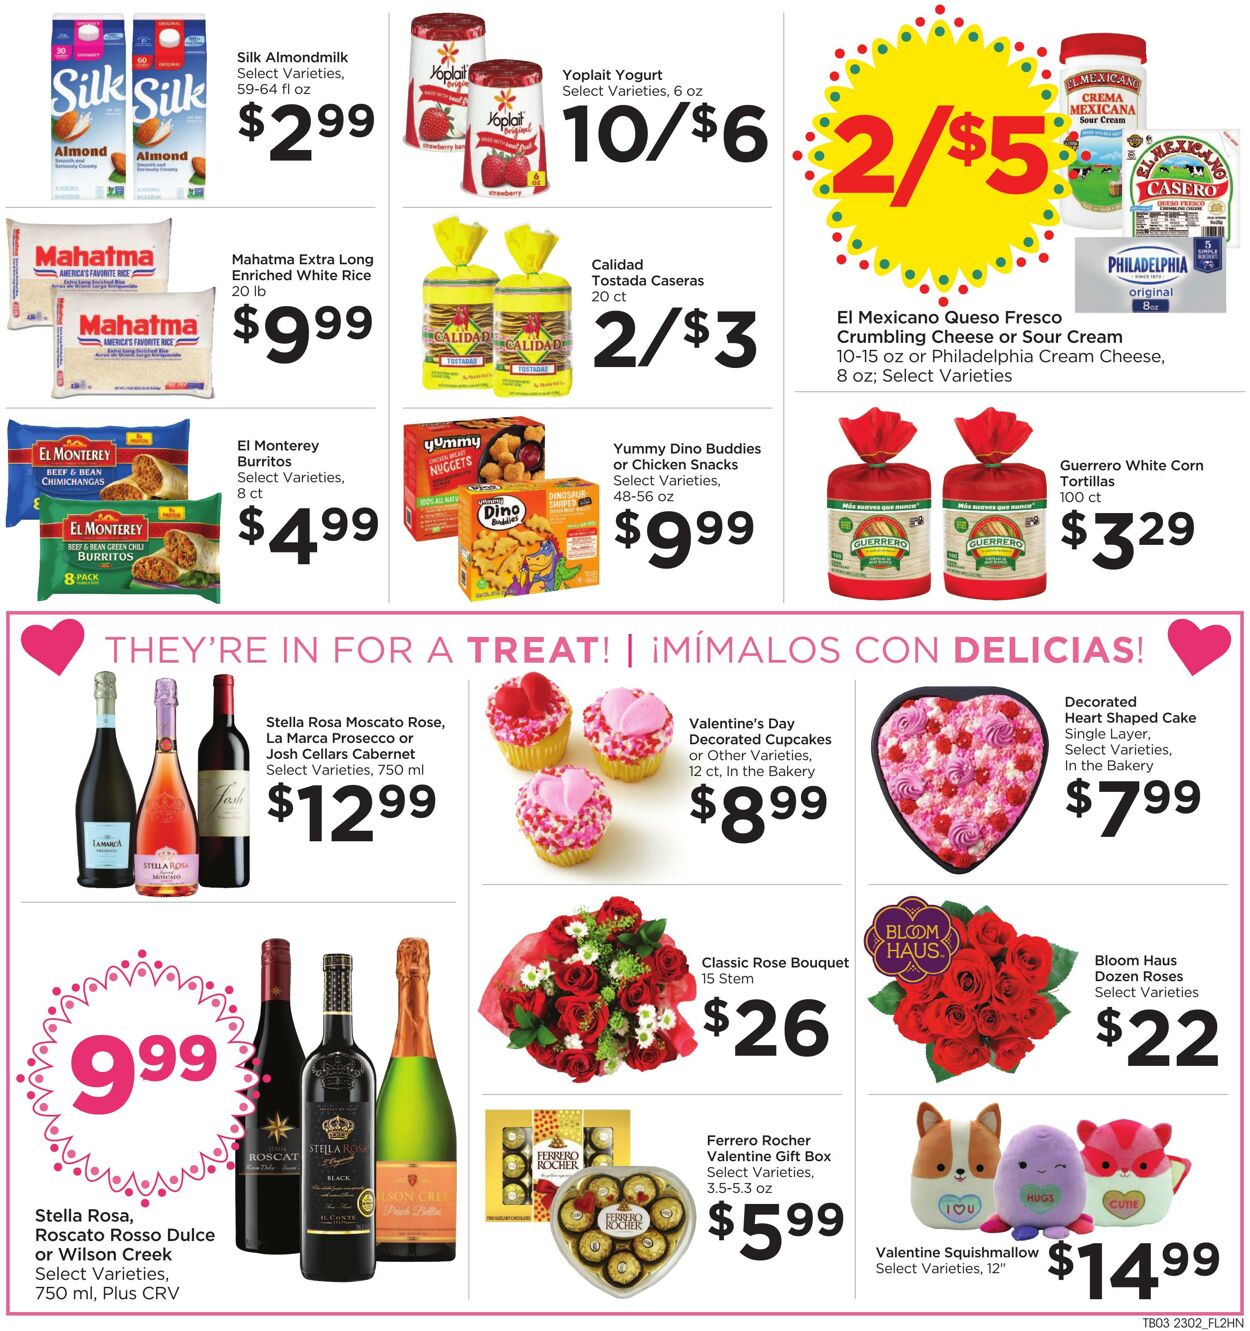 Weekly ad Foods Co 02/08/2023 - 02/14/2023